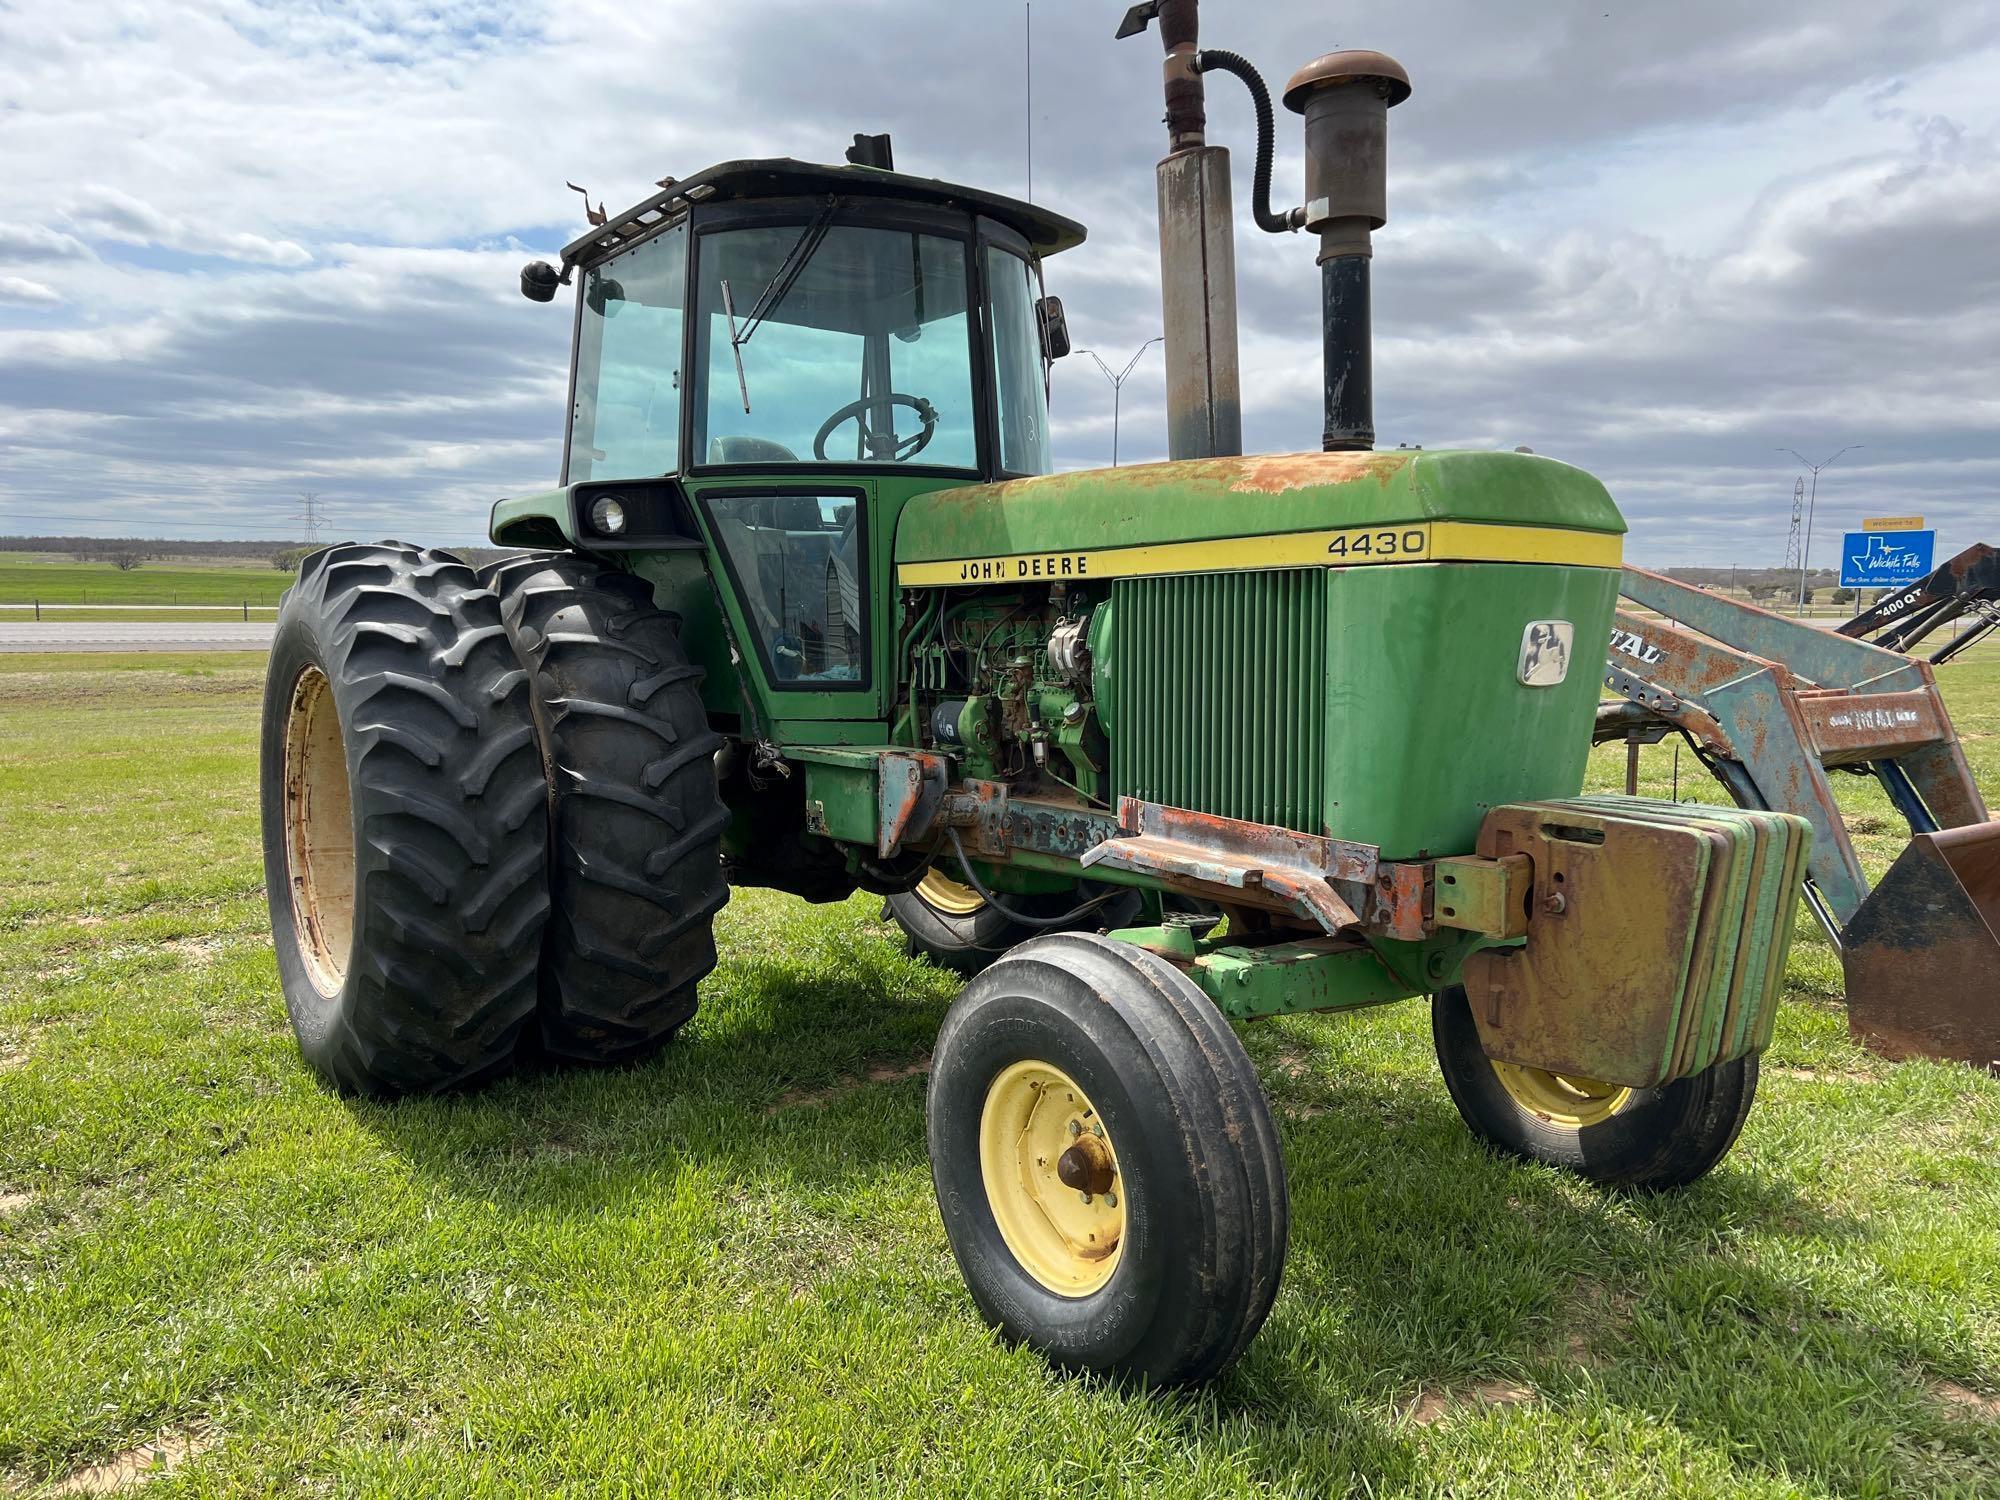 JOHN DEERE 4430 TRACTOR 2468 HOURS POWER SHIFT TRANSMISSION EQUIPPED WITH FRONT WEIGHTS AND DUALS